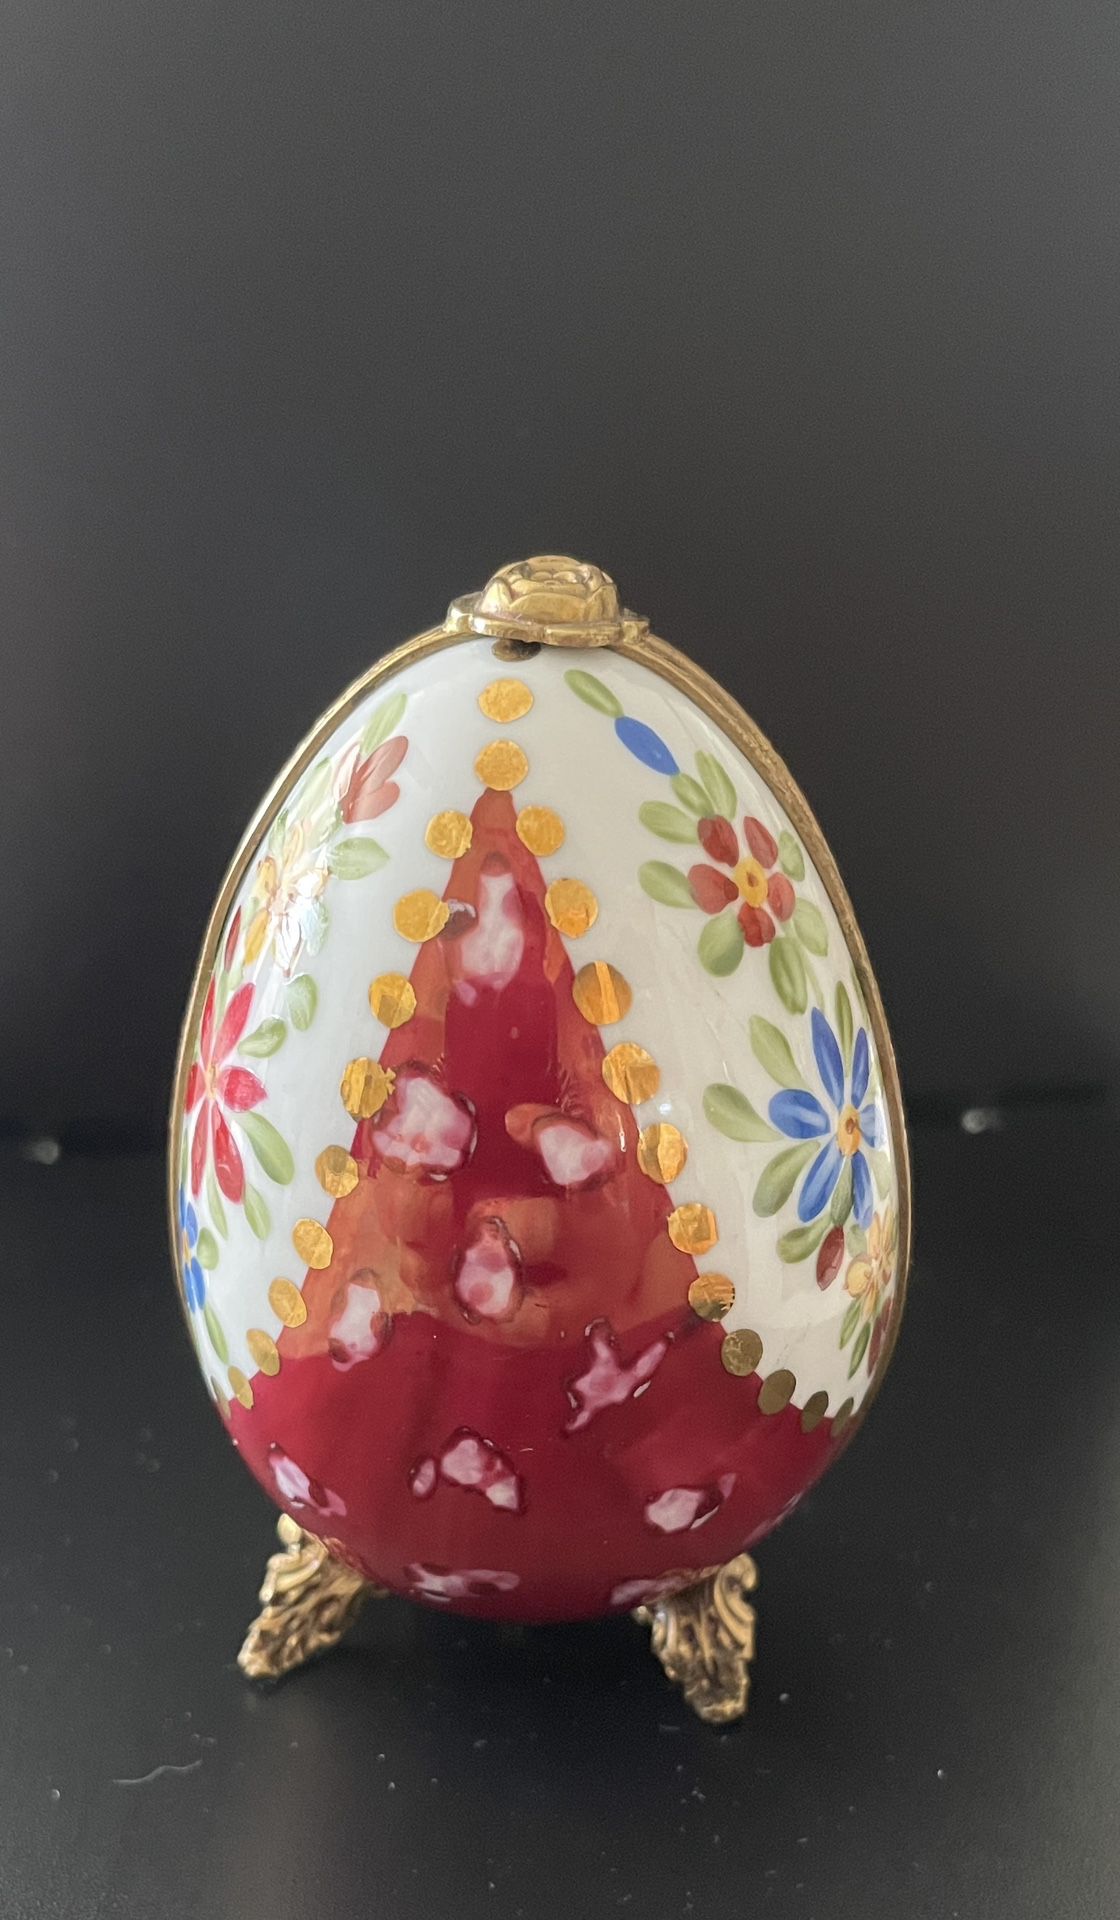  Limoges Red/floral footed egg perfume box